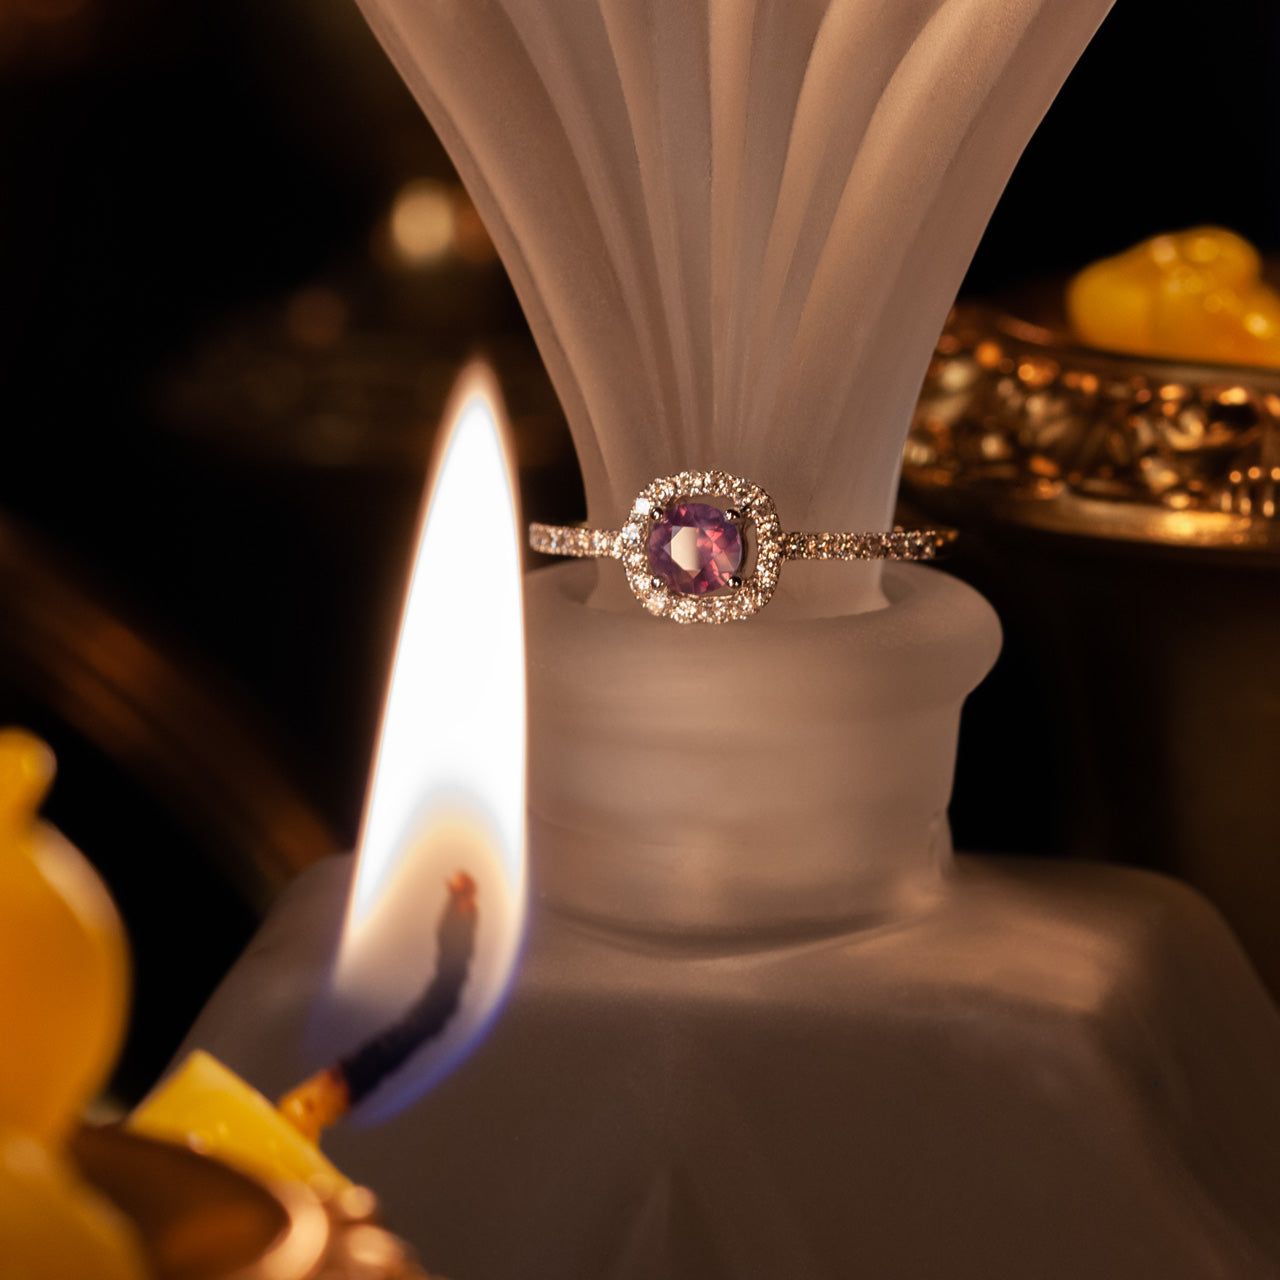 0.45ct alexandrite gemstone in 18k white gold ring showcasing its color shift on candlelight